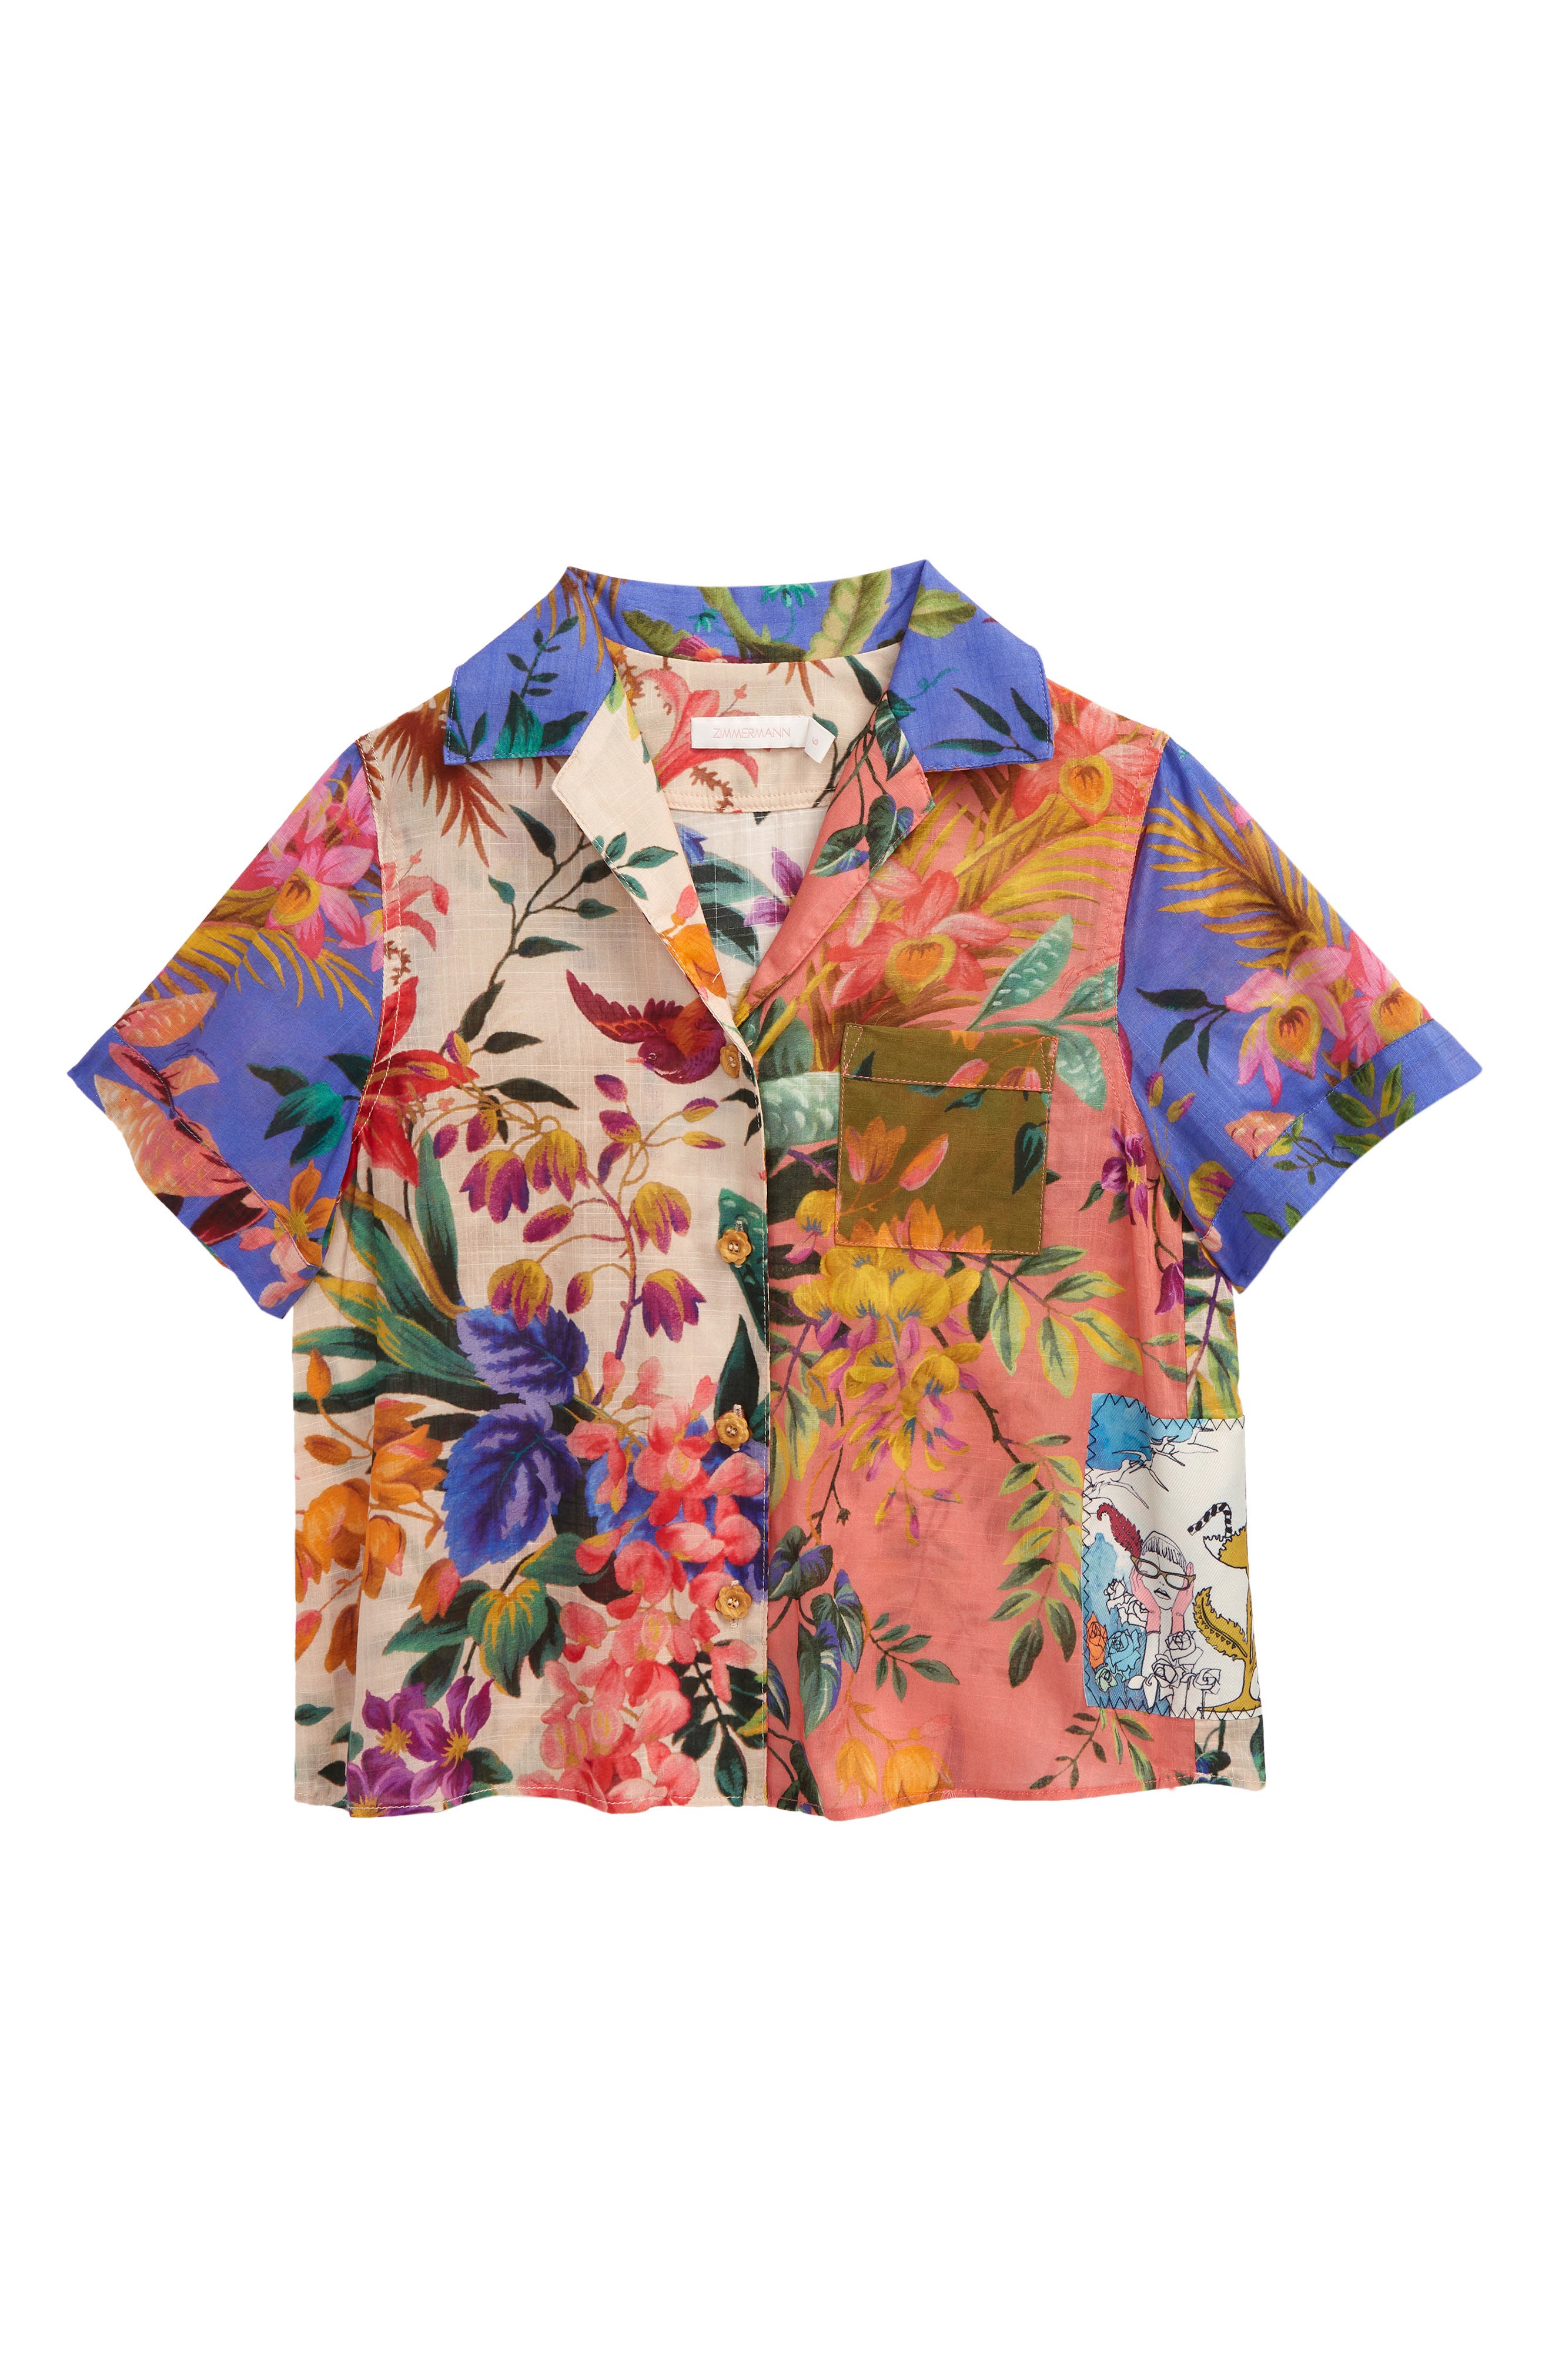 Zimmermann Kids' Tropicana Print Camp Shirt in Spliced at Nordstrom, Size 1Y Us